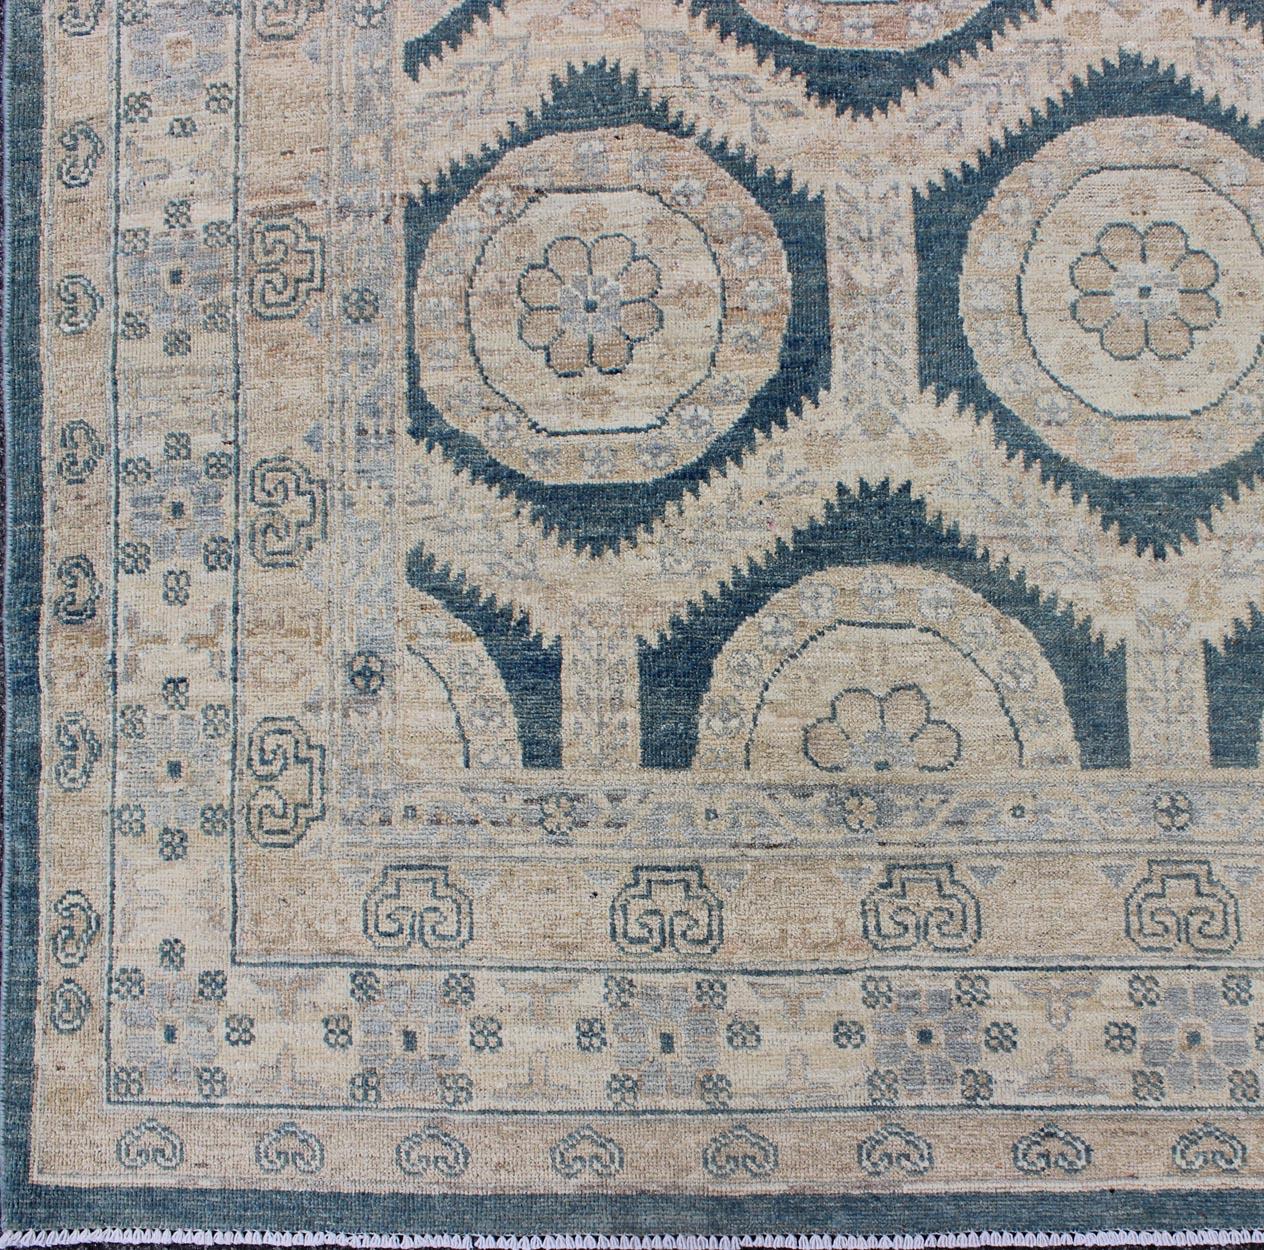 Afghan Khotan Design Rug with Geometric Medallions in Tan, Blue Gray & Teal Blue For Sale